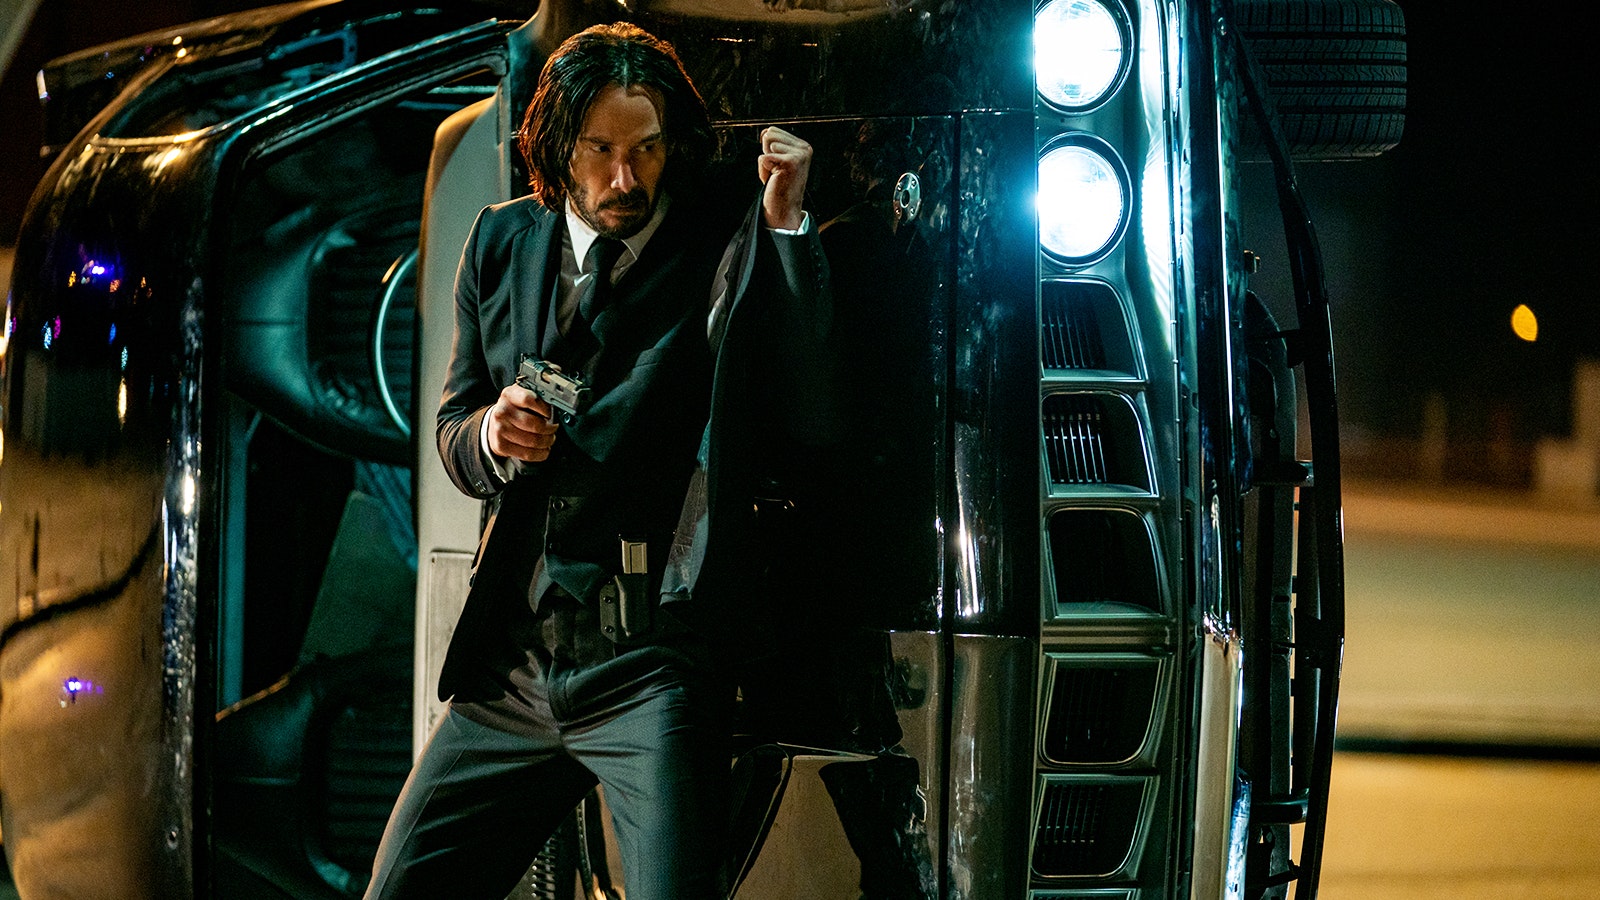 Keanu Reeves Wanted A Definitive John Wick 4 Ending, But Producers Didn't